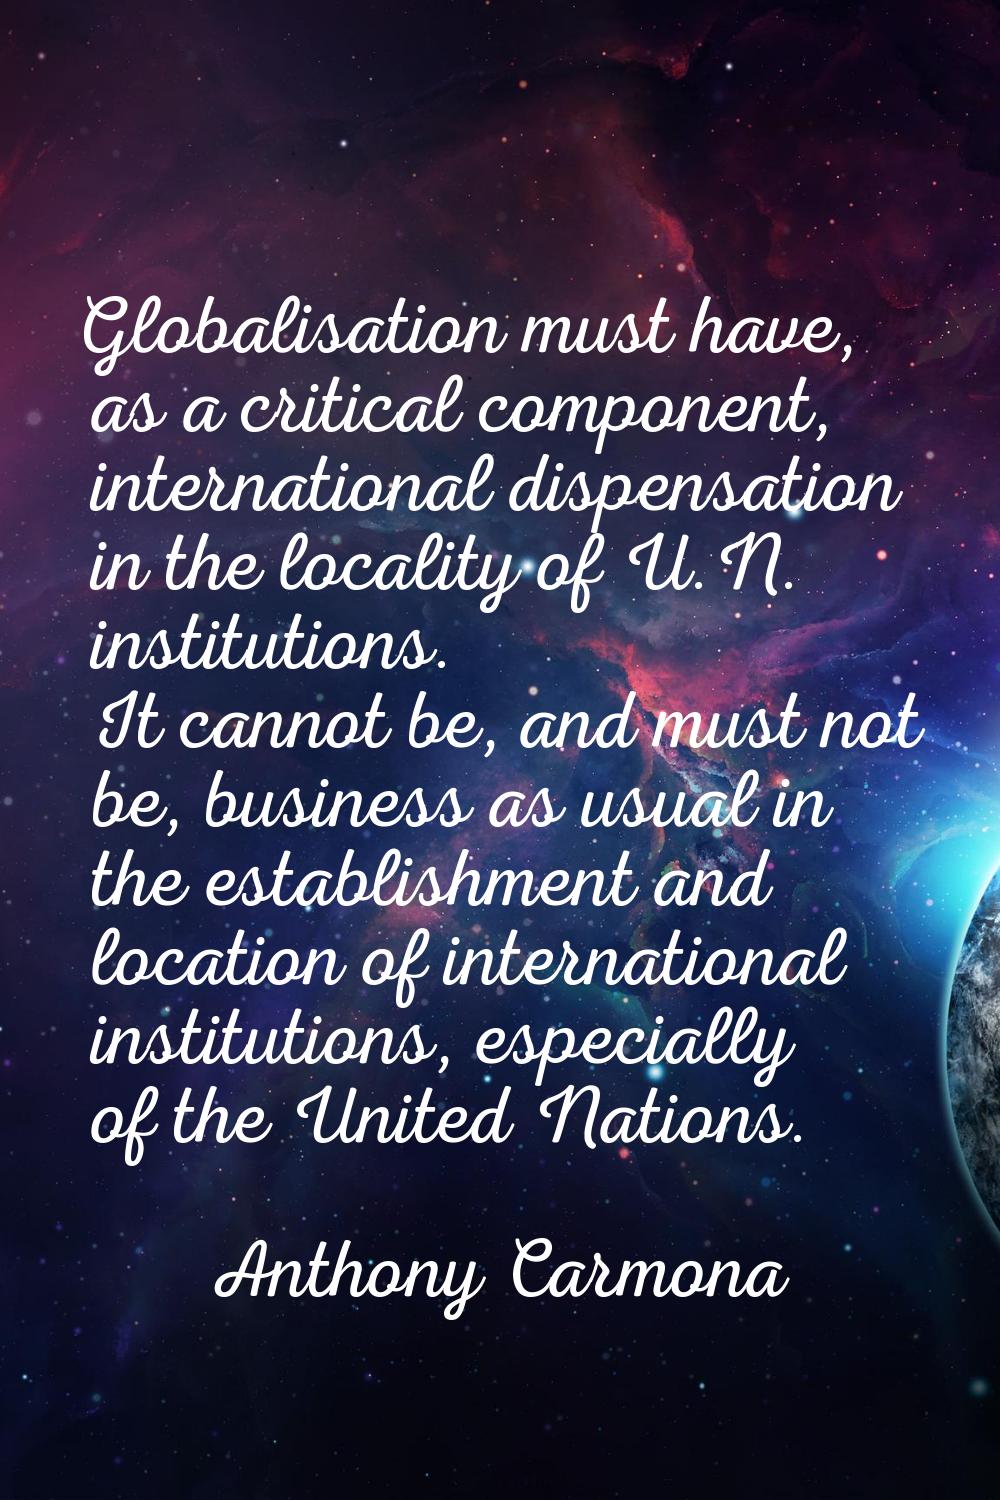 Globalisation must have, as a critical component, international dispensation in the locality of U.N